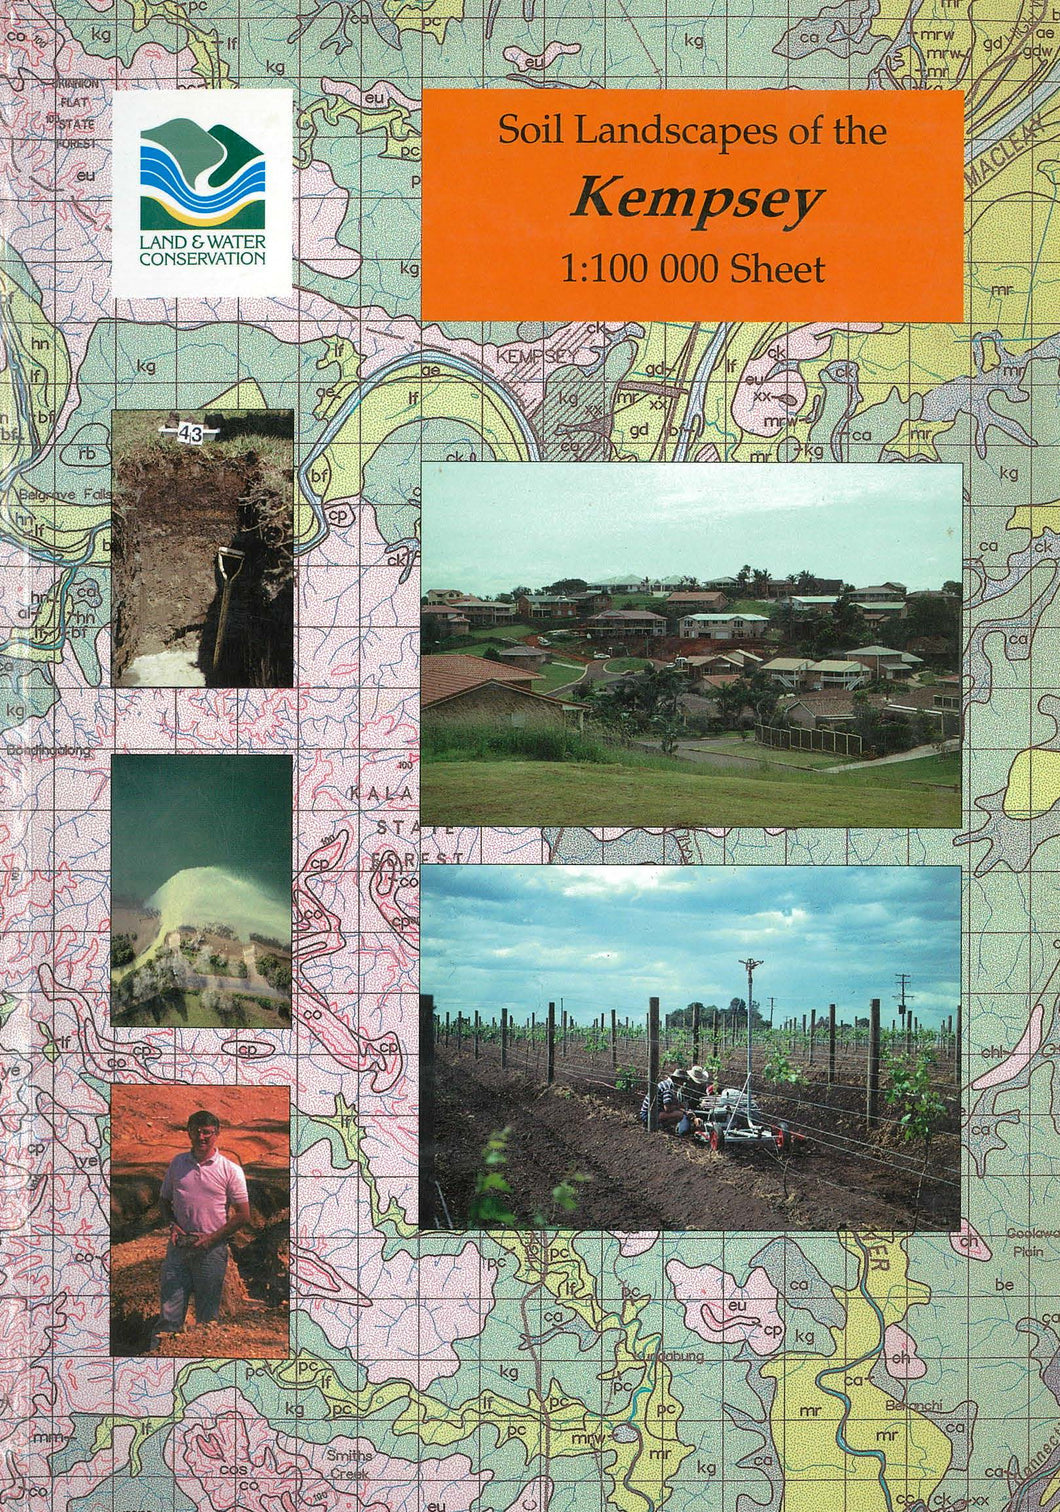 Soil Landscapes of the Kempsey-Korogoro Point 1:100 000 Sheets report cover